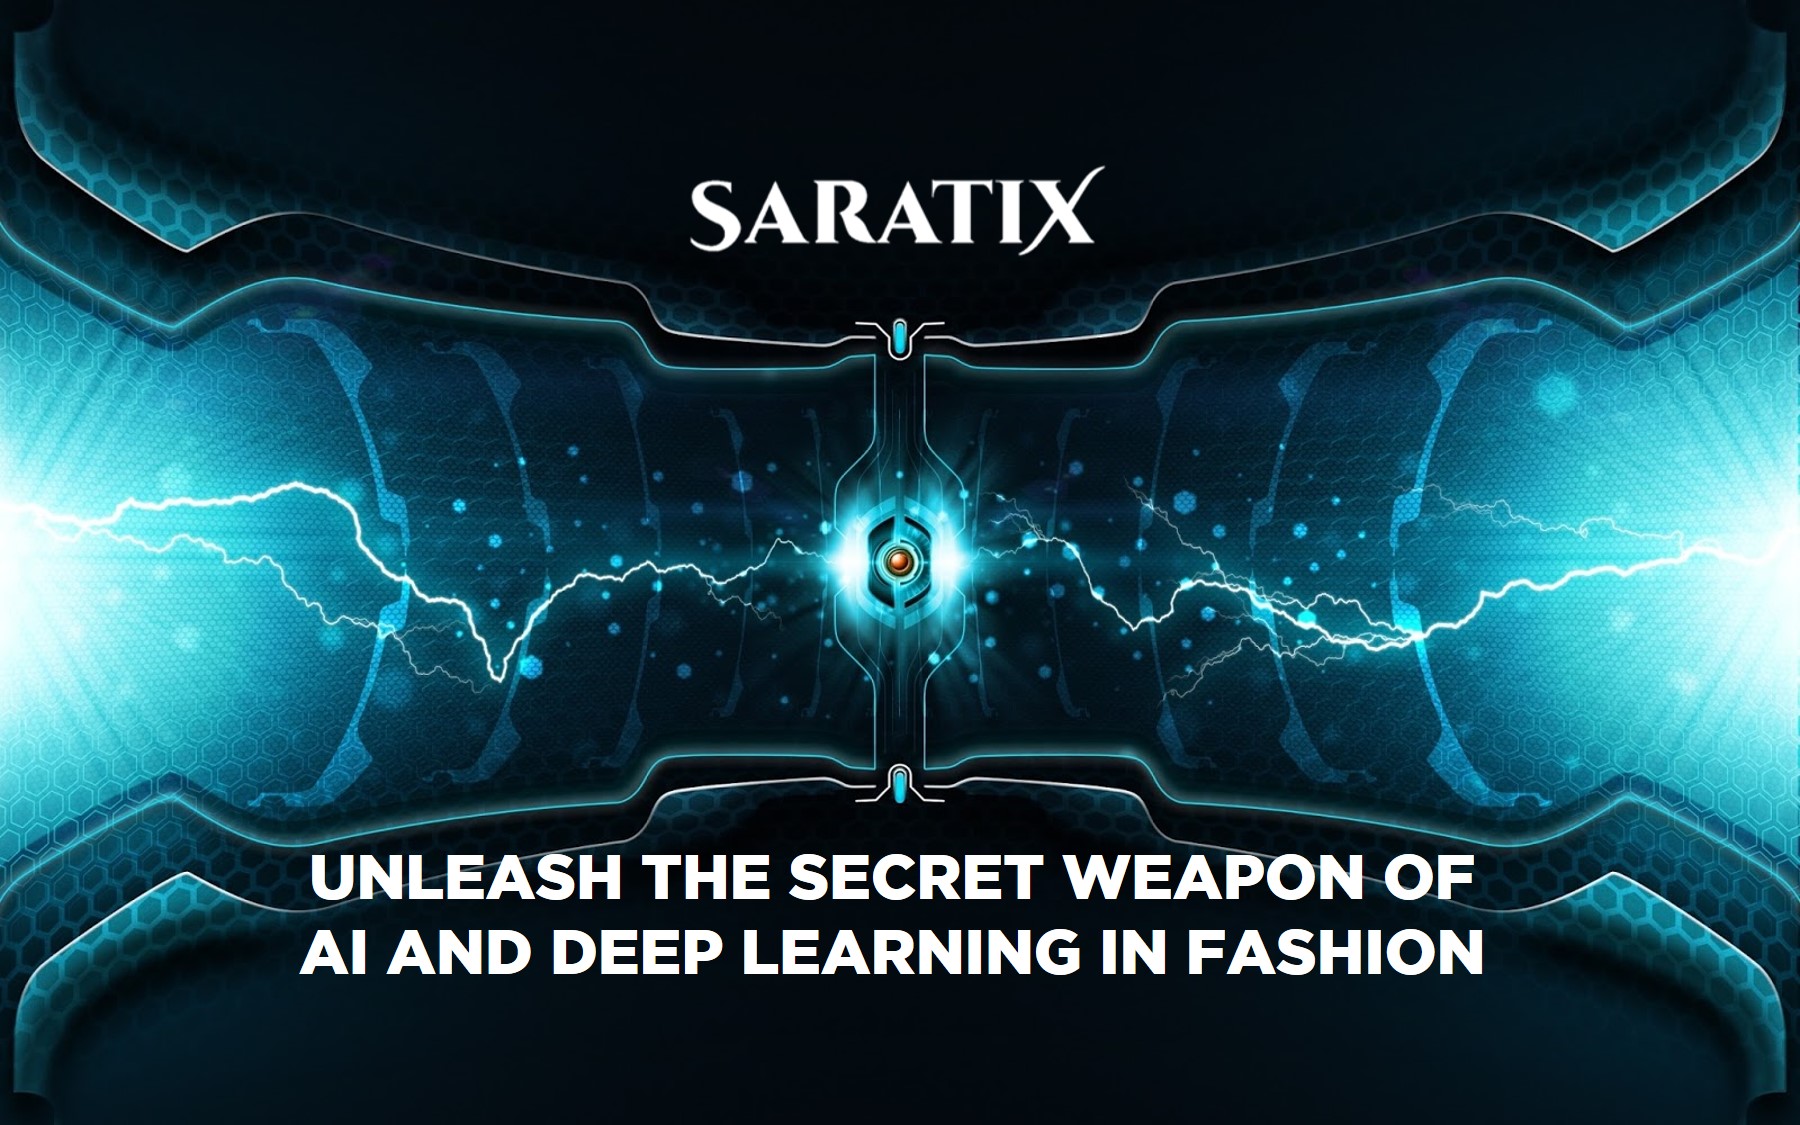 Malaysia’s first fashion artificial intelligence tool SARA launched